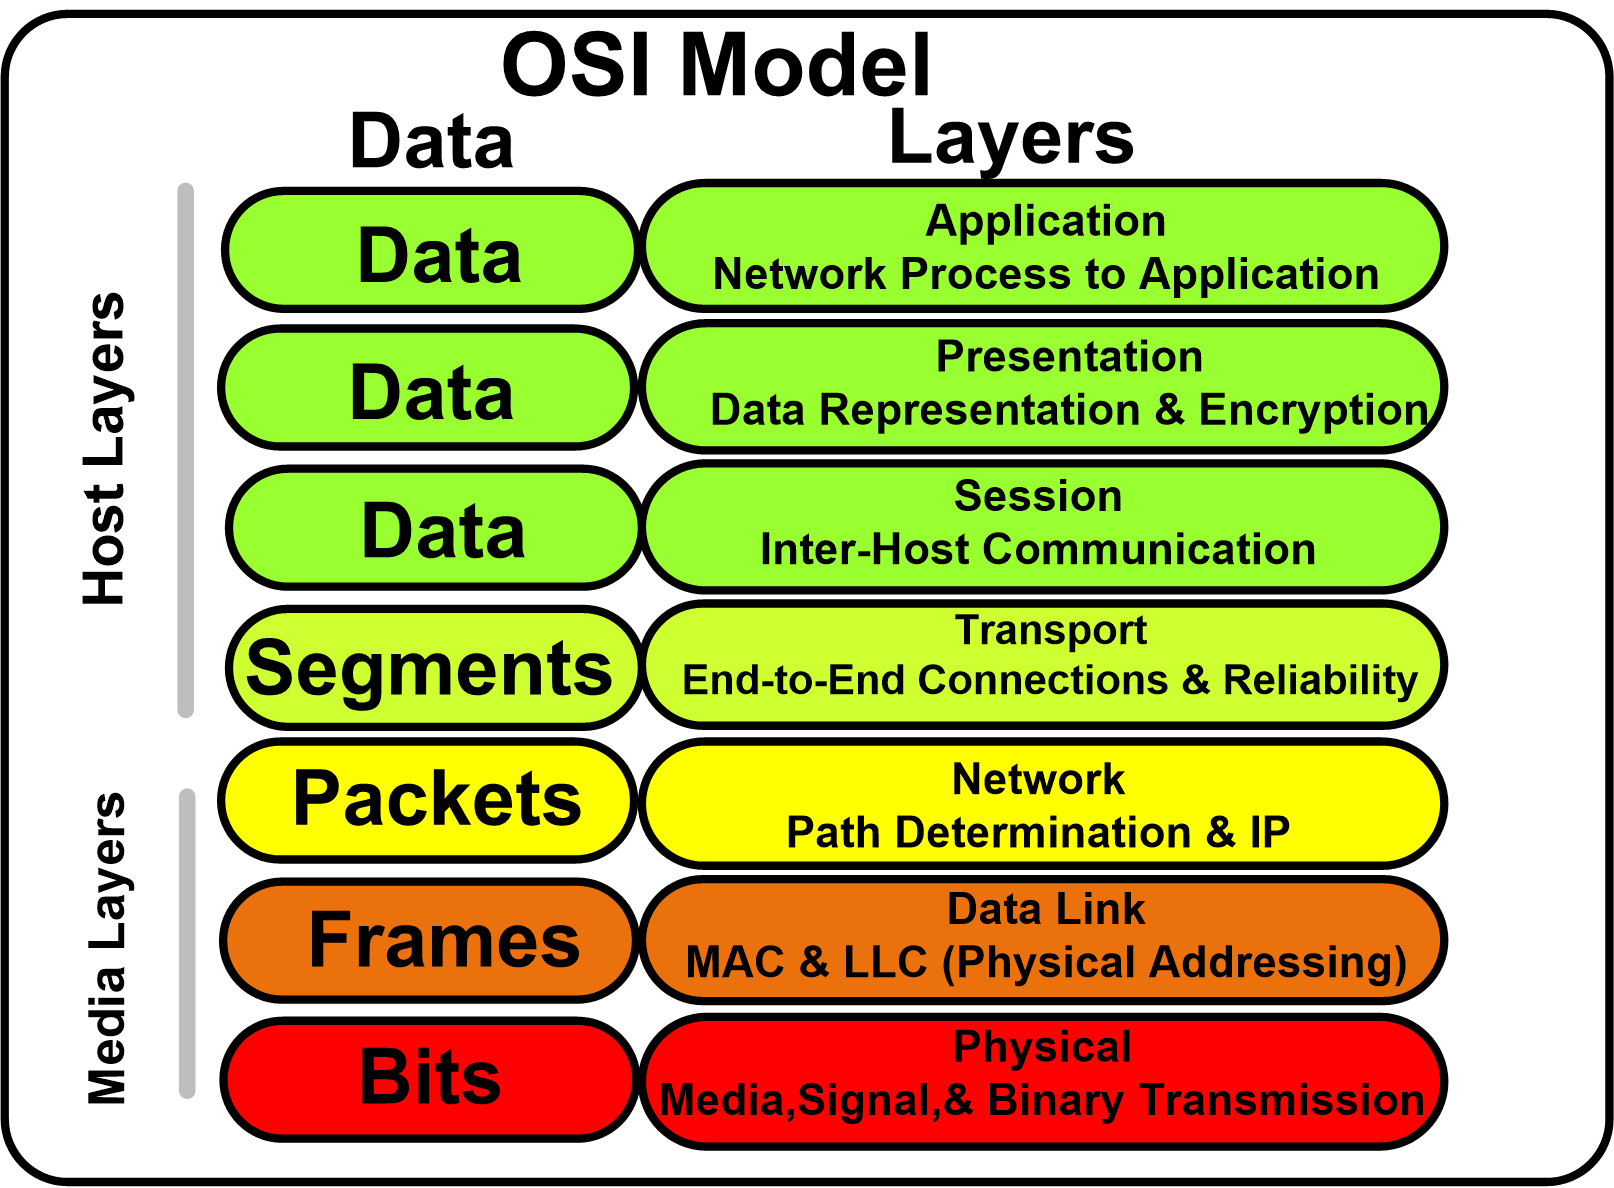 Picture of the 7-layer OSI networking model